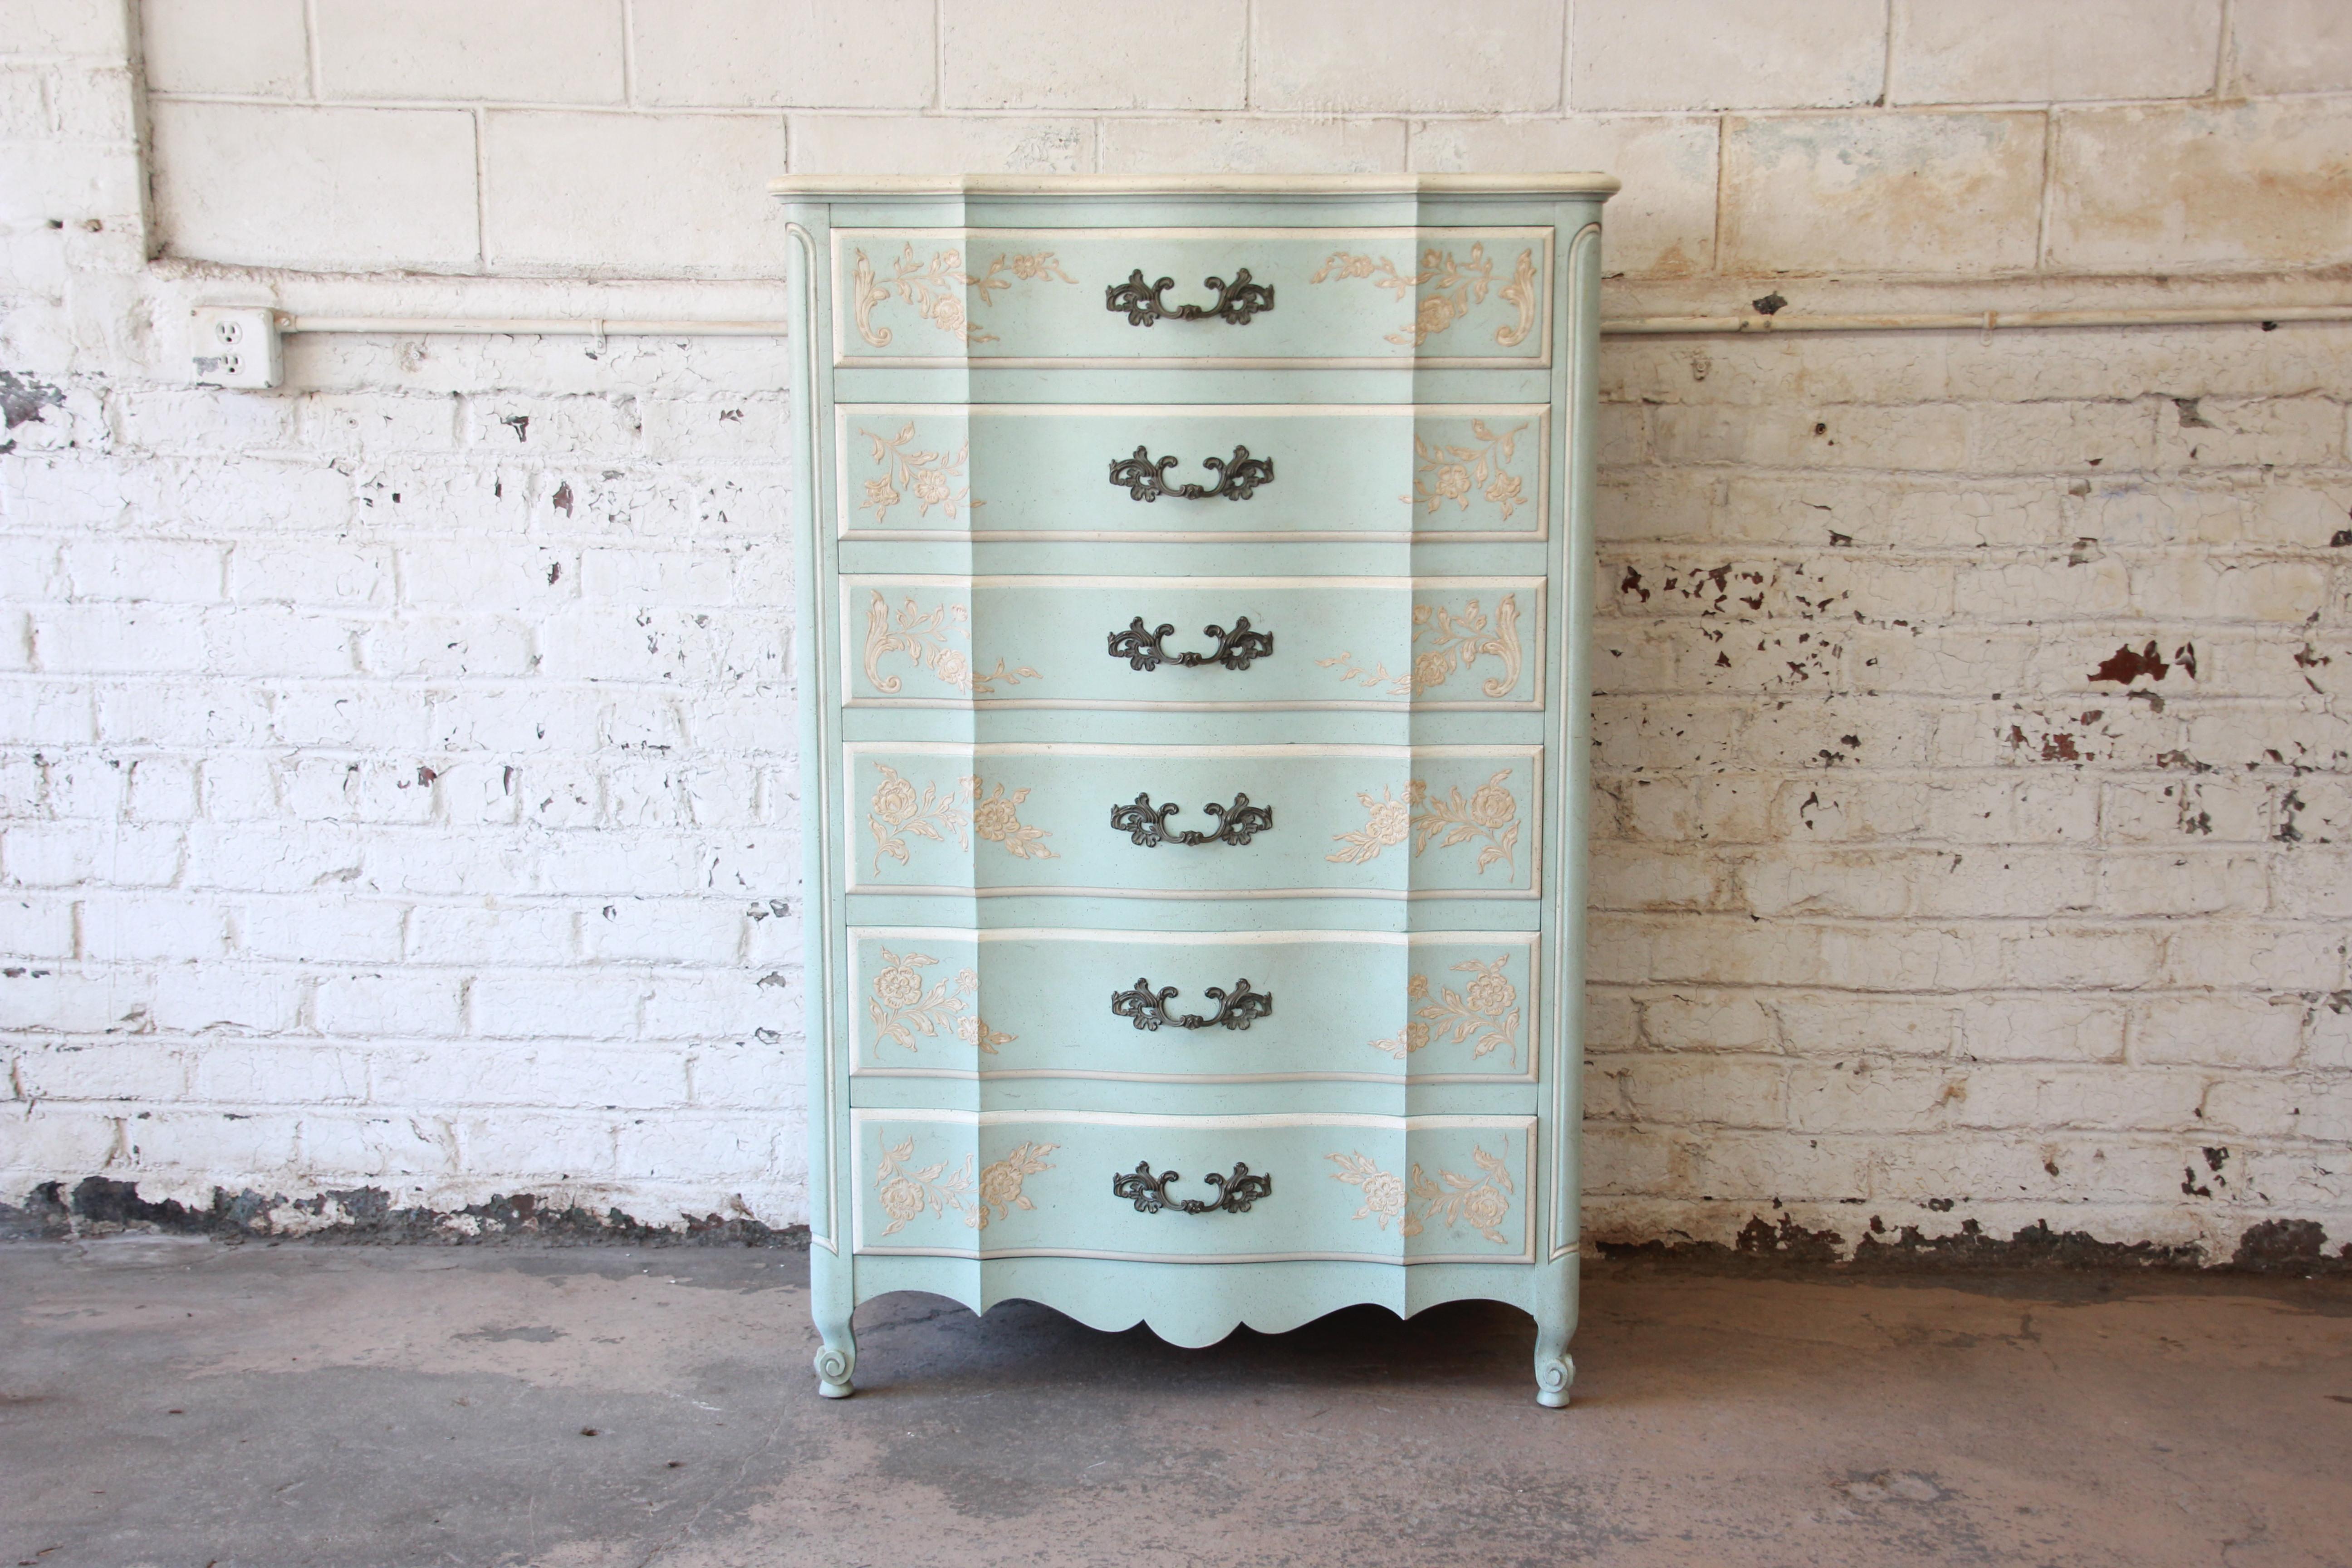 A gorgeous vintage French Provincial Louis XV style highboy dresser by John Widdicomb. The chest features the original light blue finish, with ivory trim and beautiful floral details. It offers ample room for storage, with six deep dovetailed